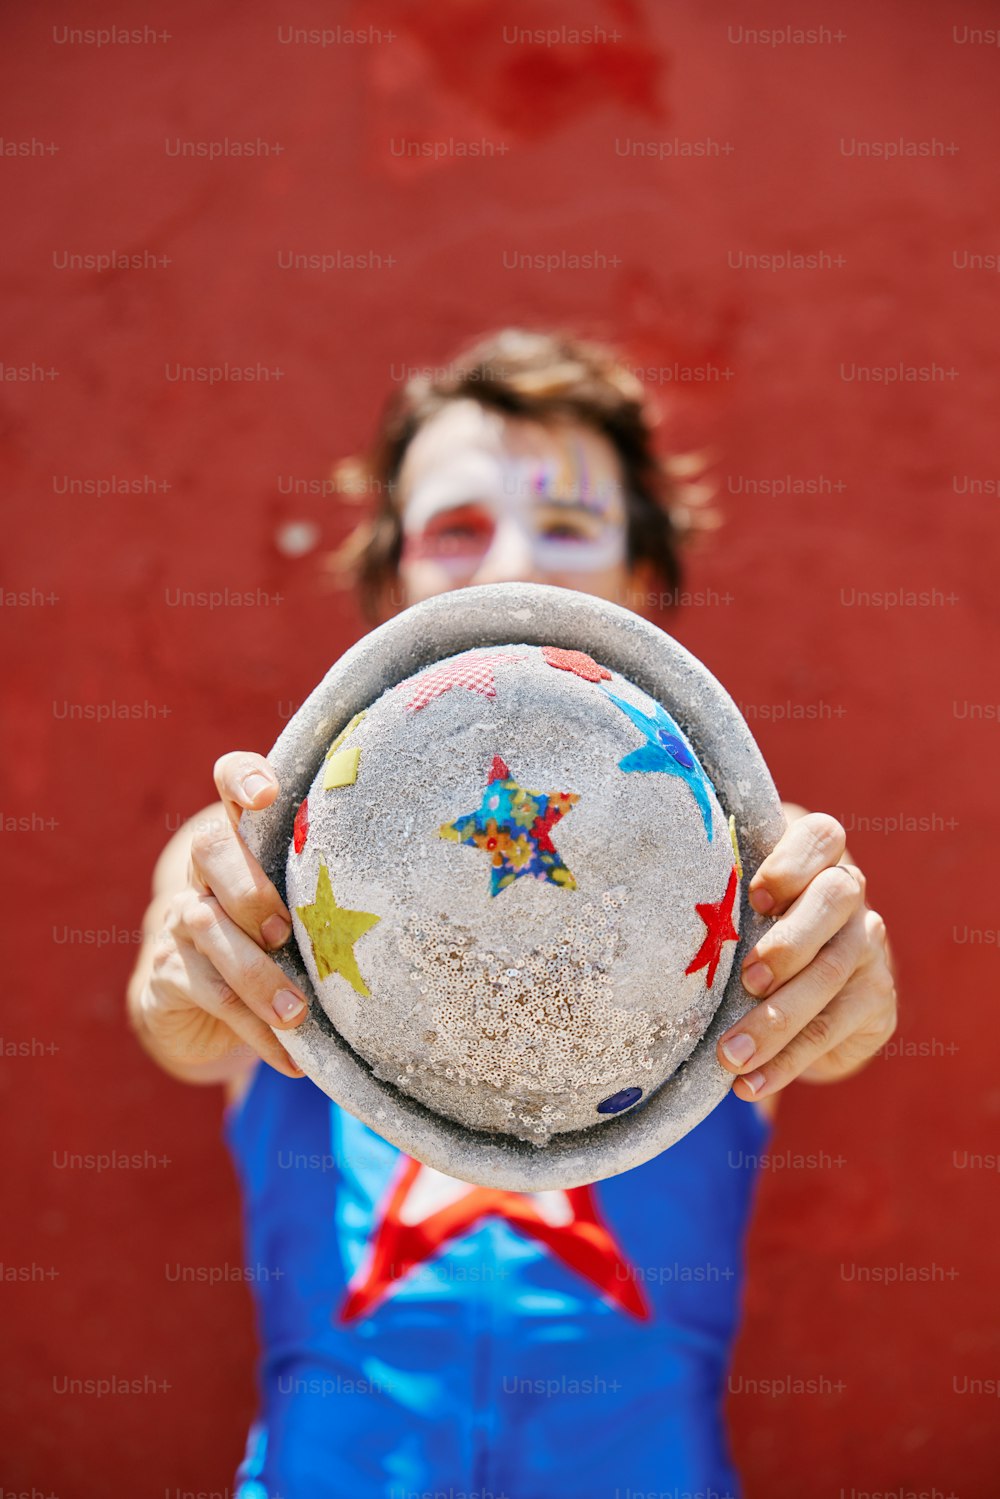 a person wearing a clown makeup holding a plate